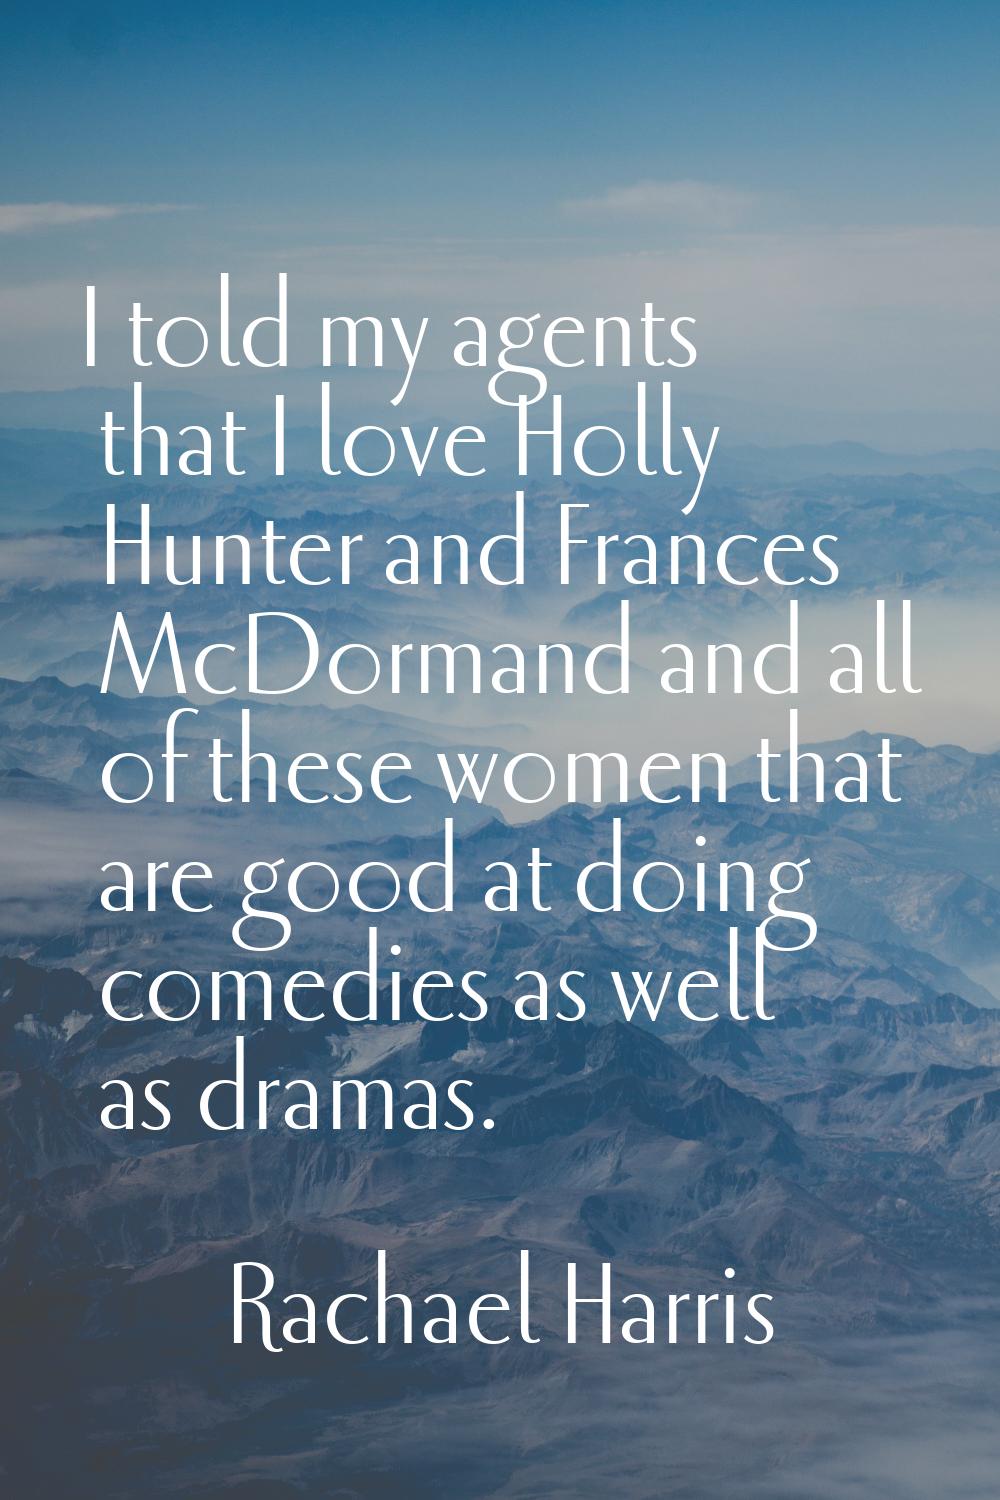 I told my agents that I love Holly Hunter and Frances McDormand and all of these women that are goo